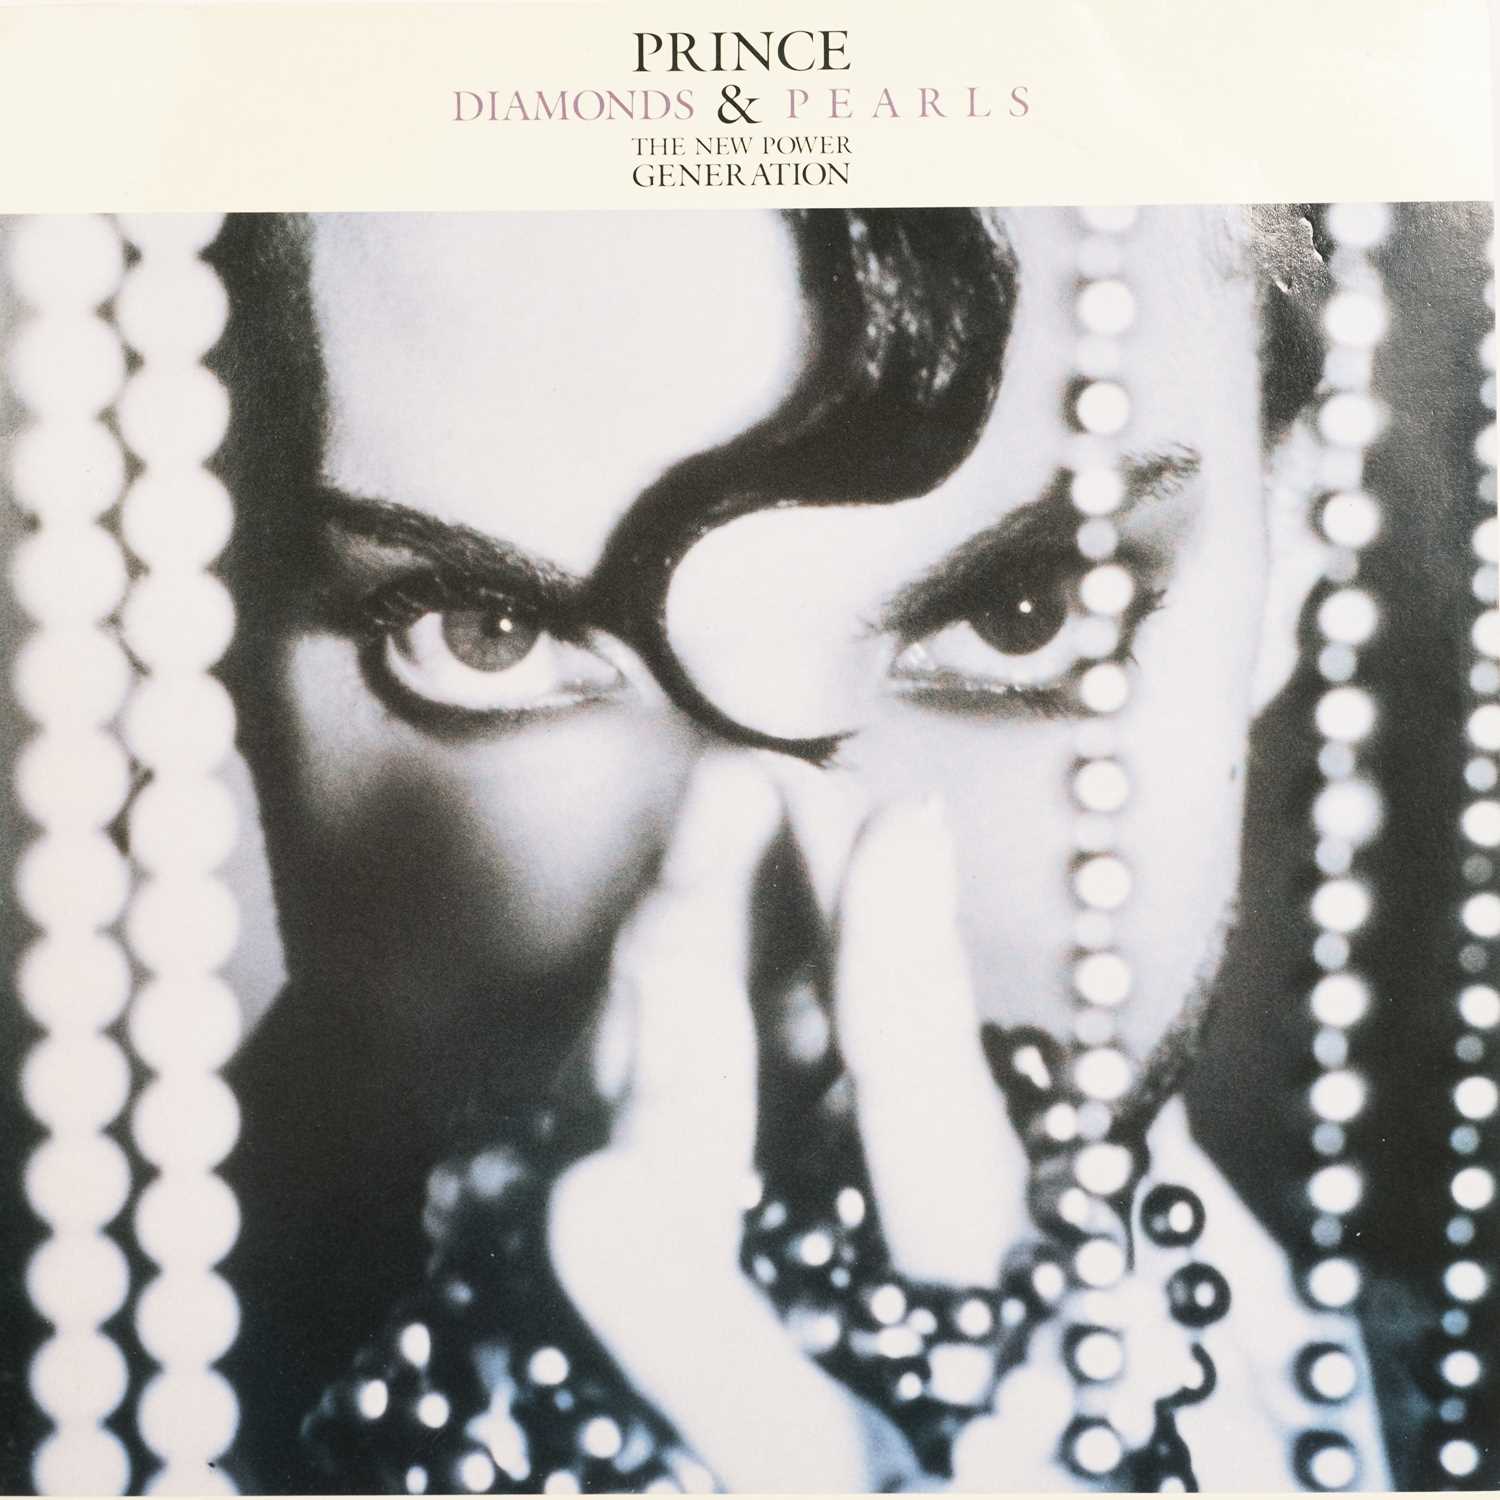 Prince 12" singles and picture discs. - Image 18 of 34